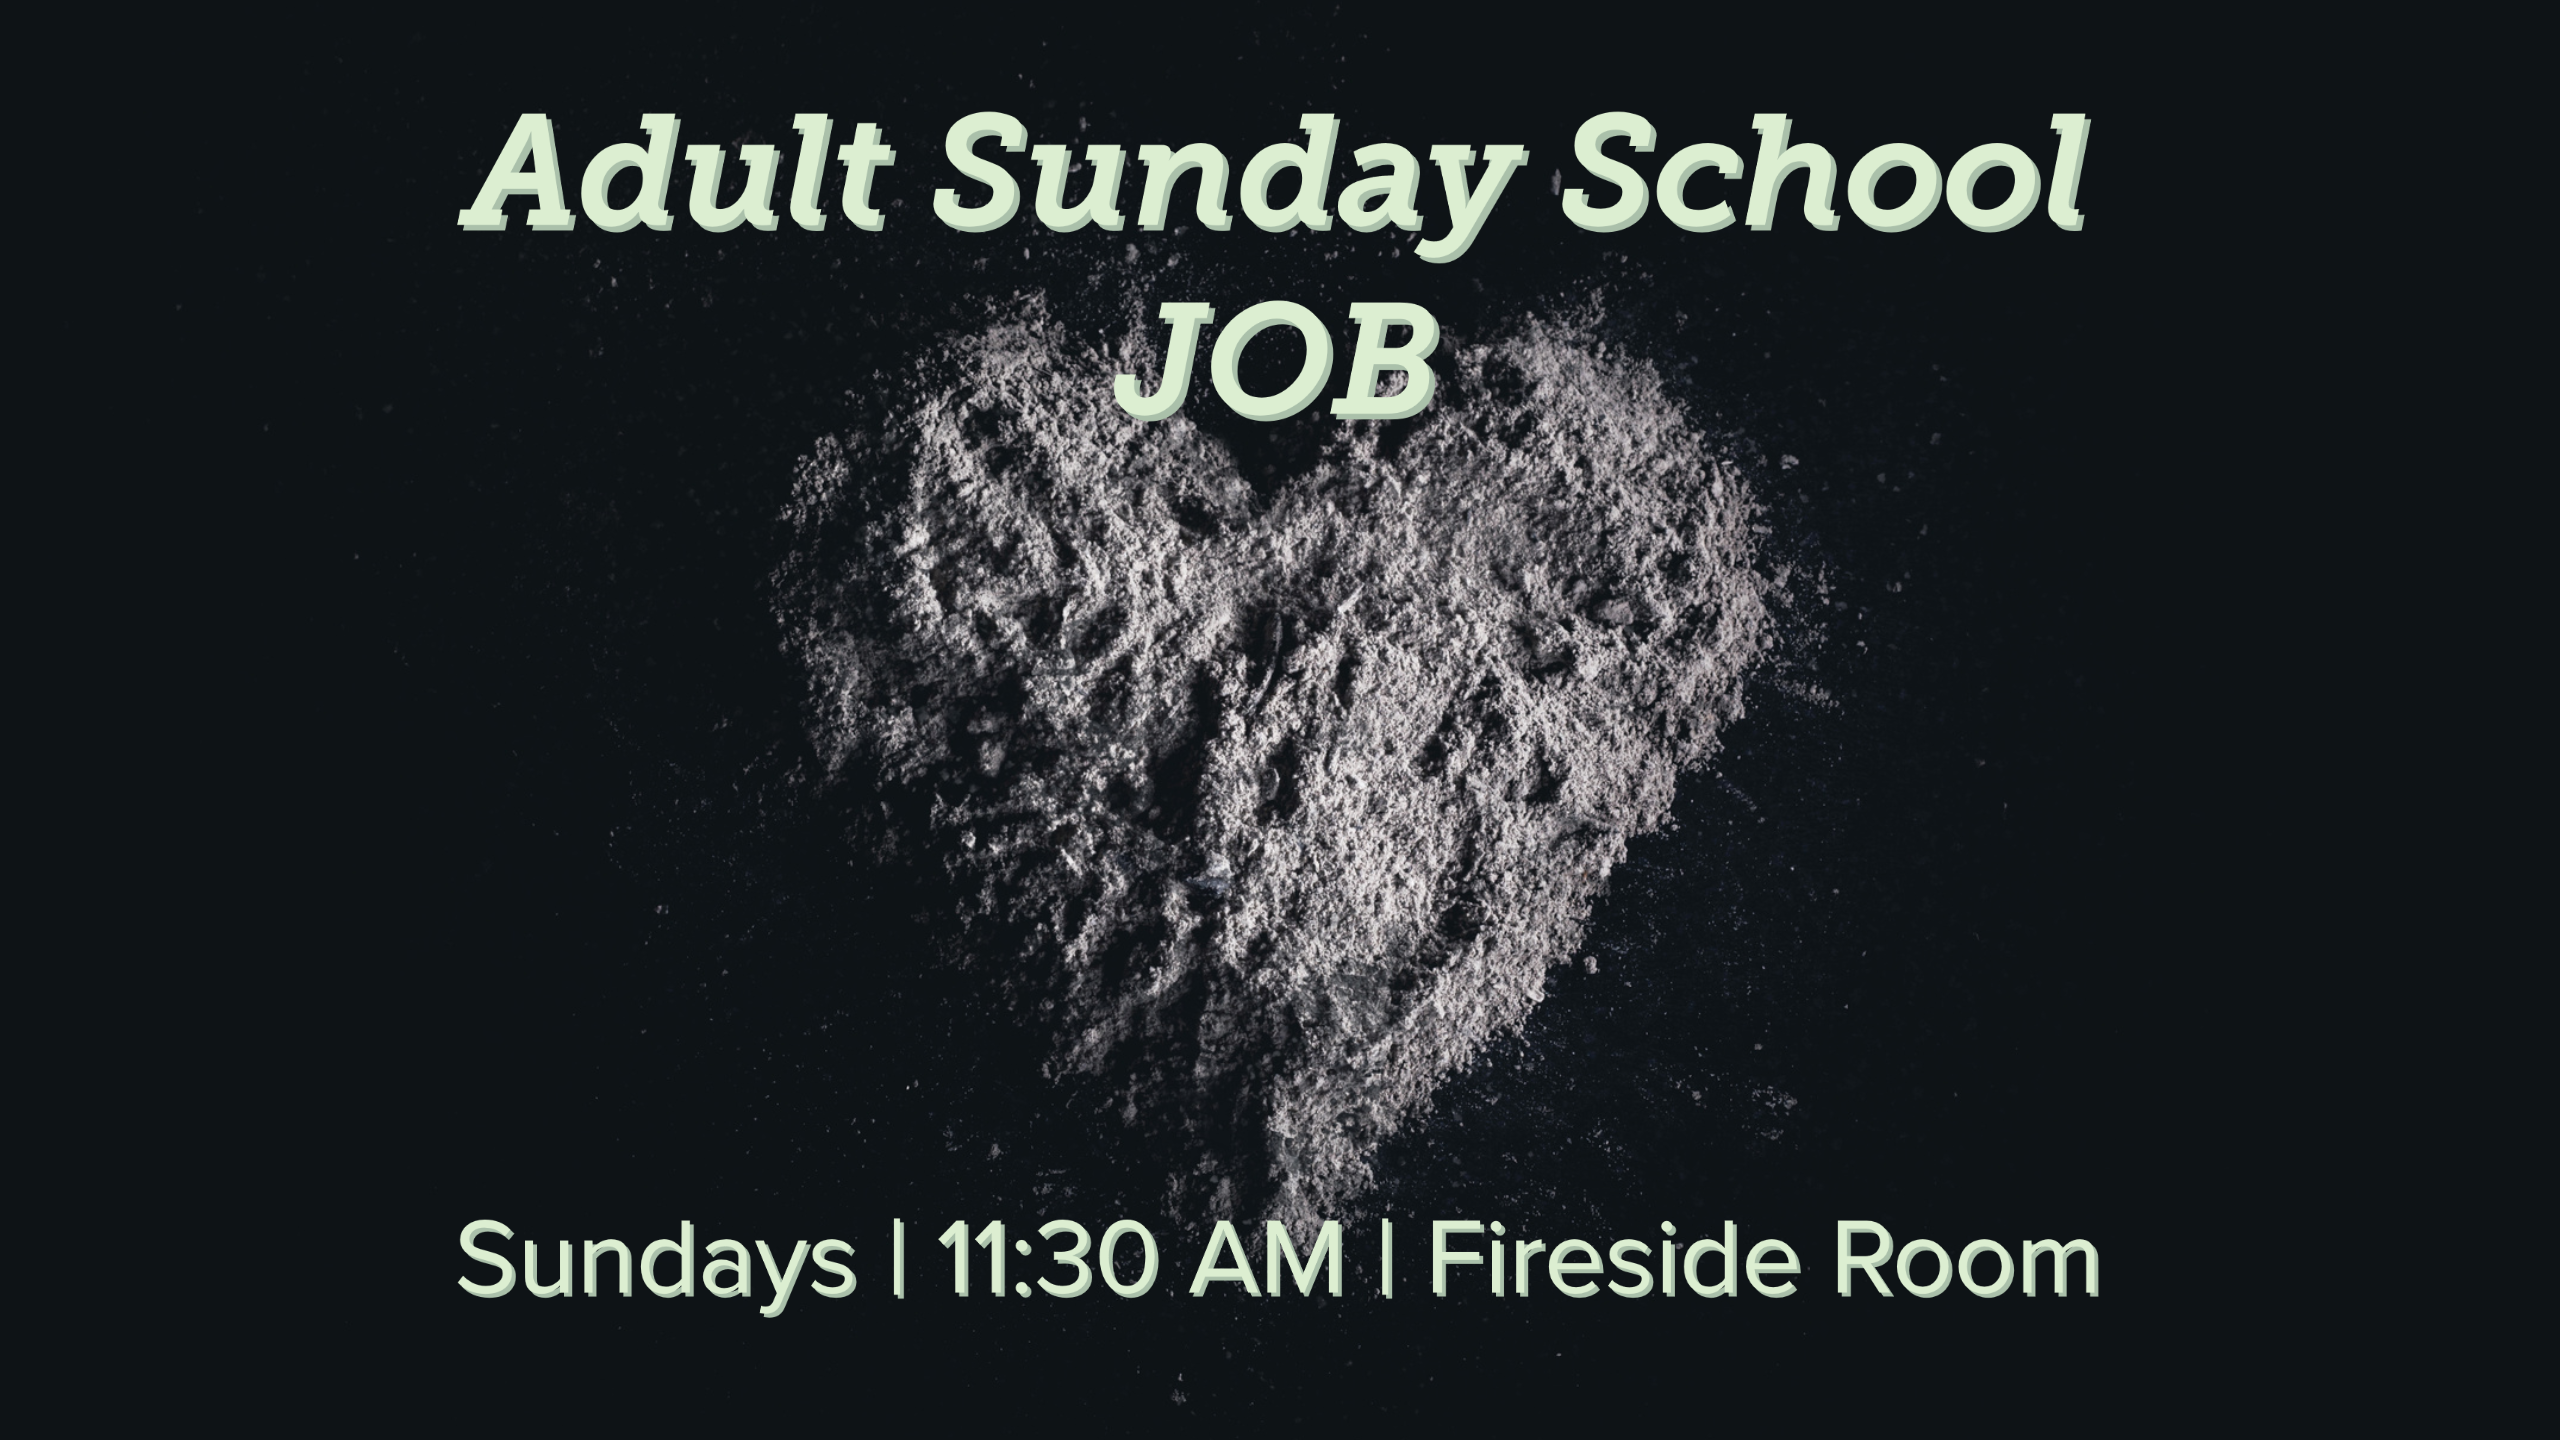 a pile of ash arranged in a heart shape on a black surface with the words "Adult Sunday School JOB Sundays | 11:30 AM | Fireside Room"